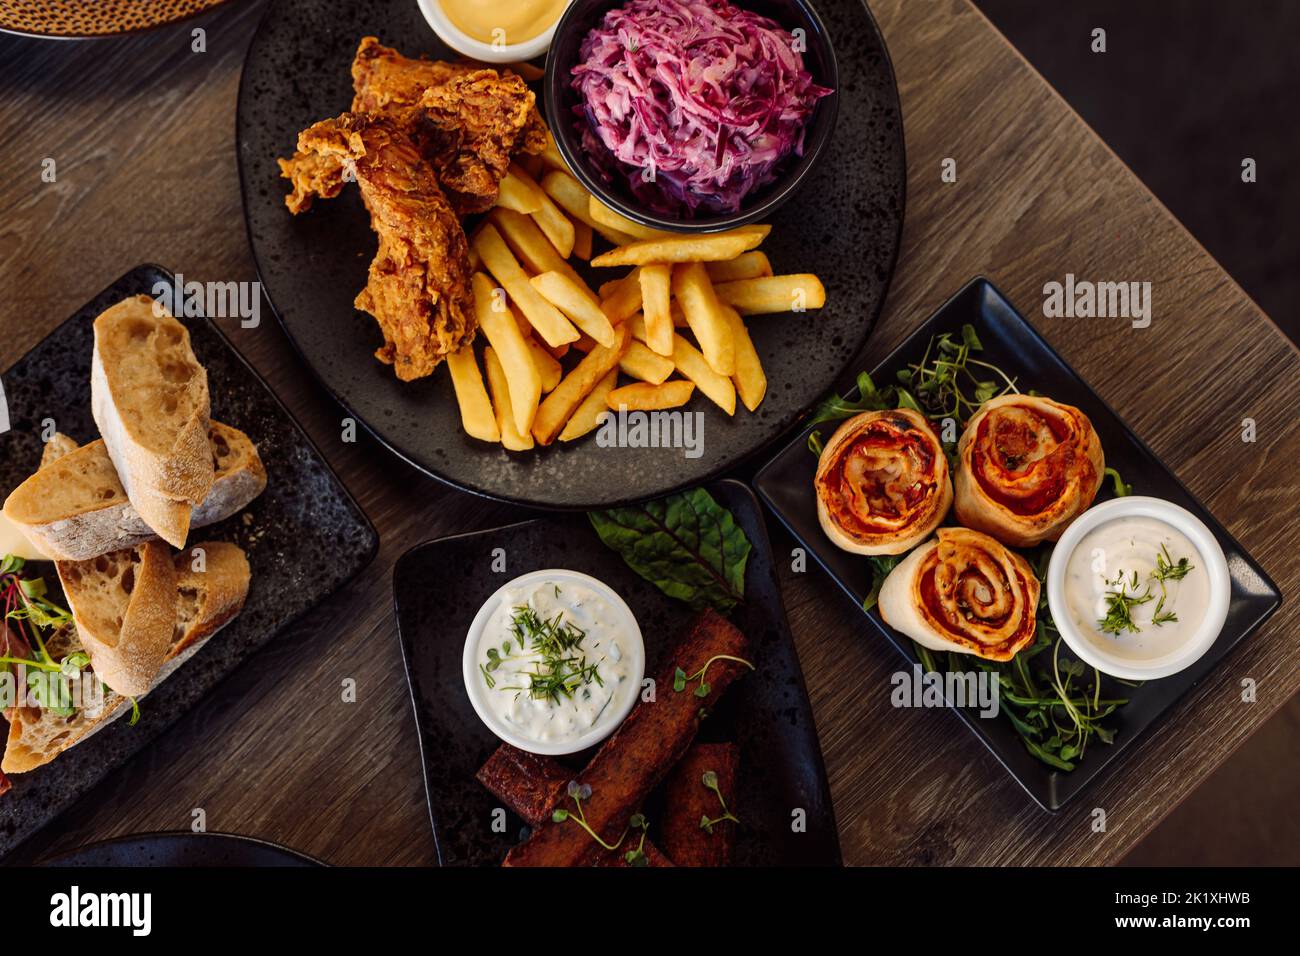 Ciabatta plate, vegetables on plate and roasted grill chicken, french fries, beet root salad, meat rolls. Table layout Stock Photo